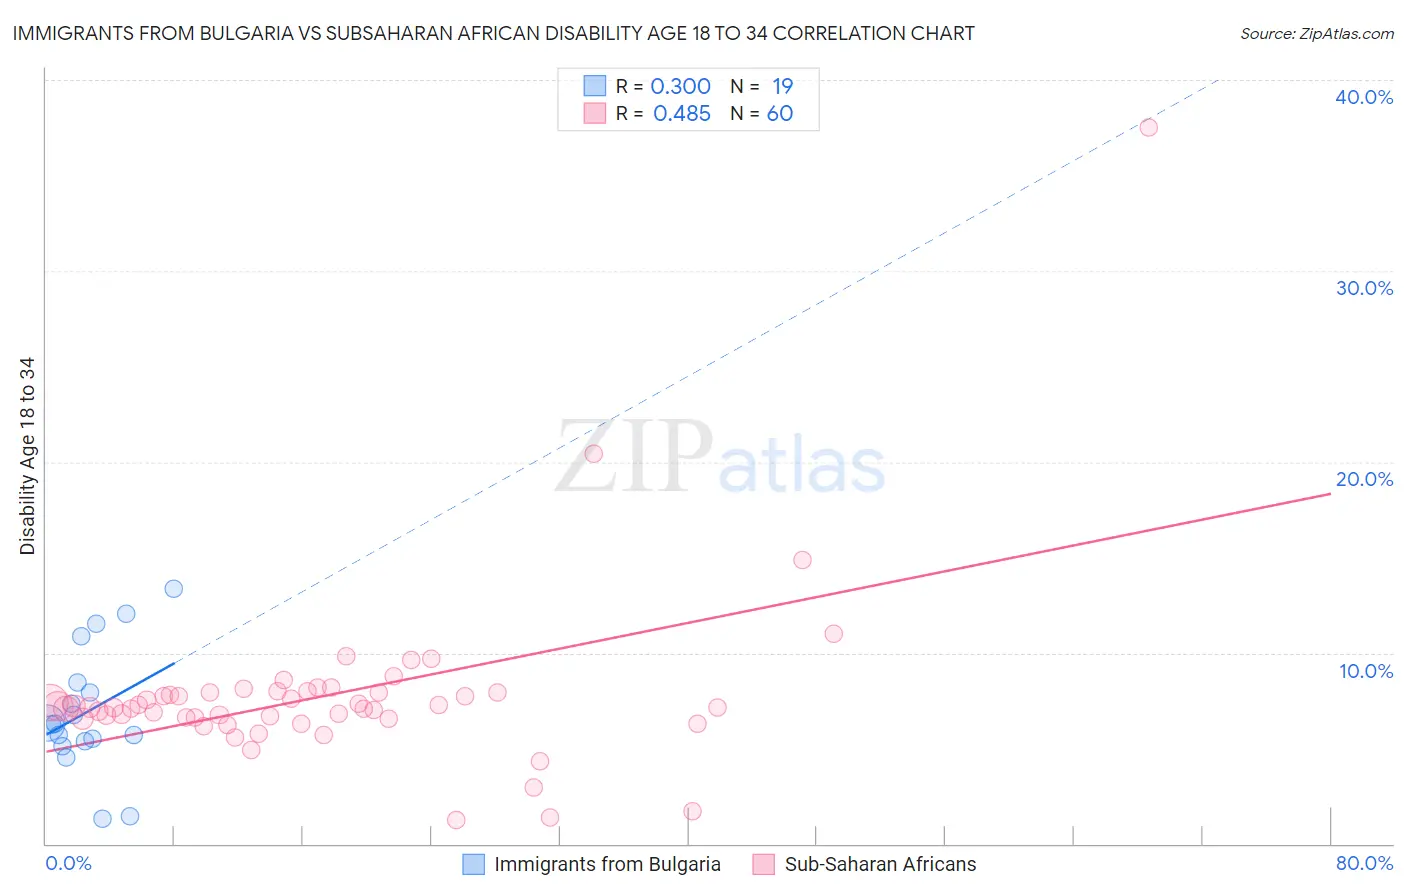 Immigrants from Bulgaria vs Subsaharan African Disability Age 18 to 34